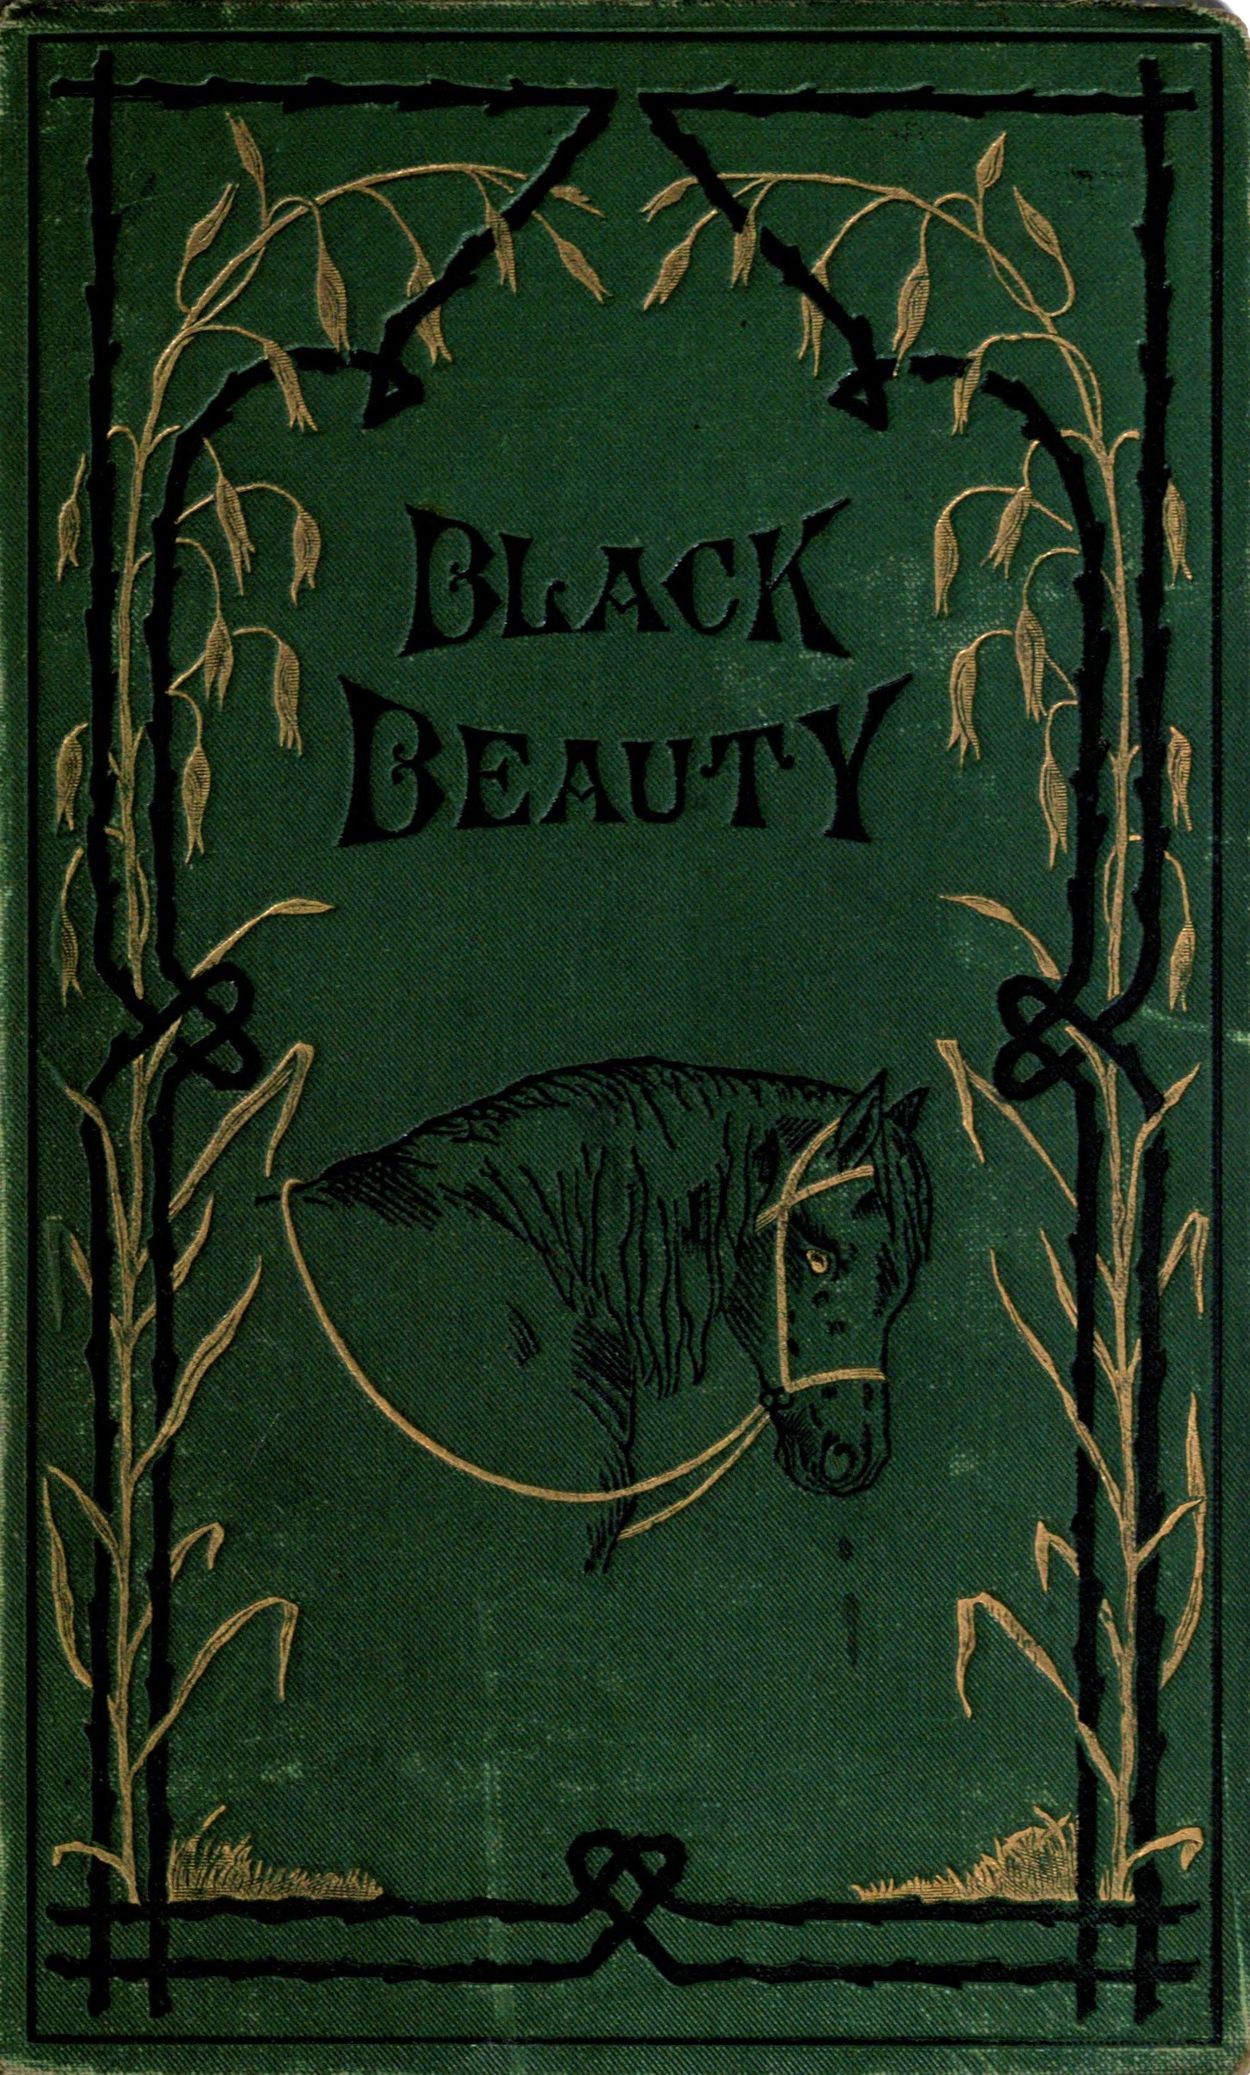 book review about black beauty